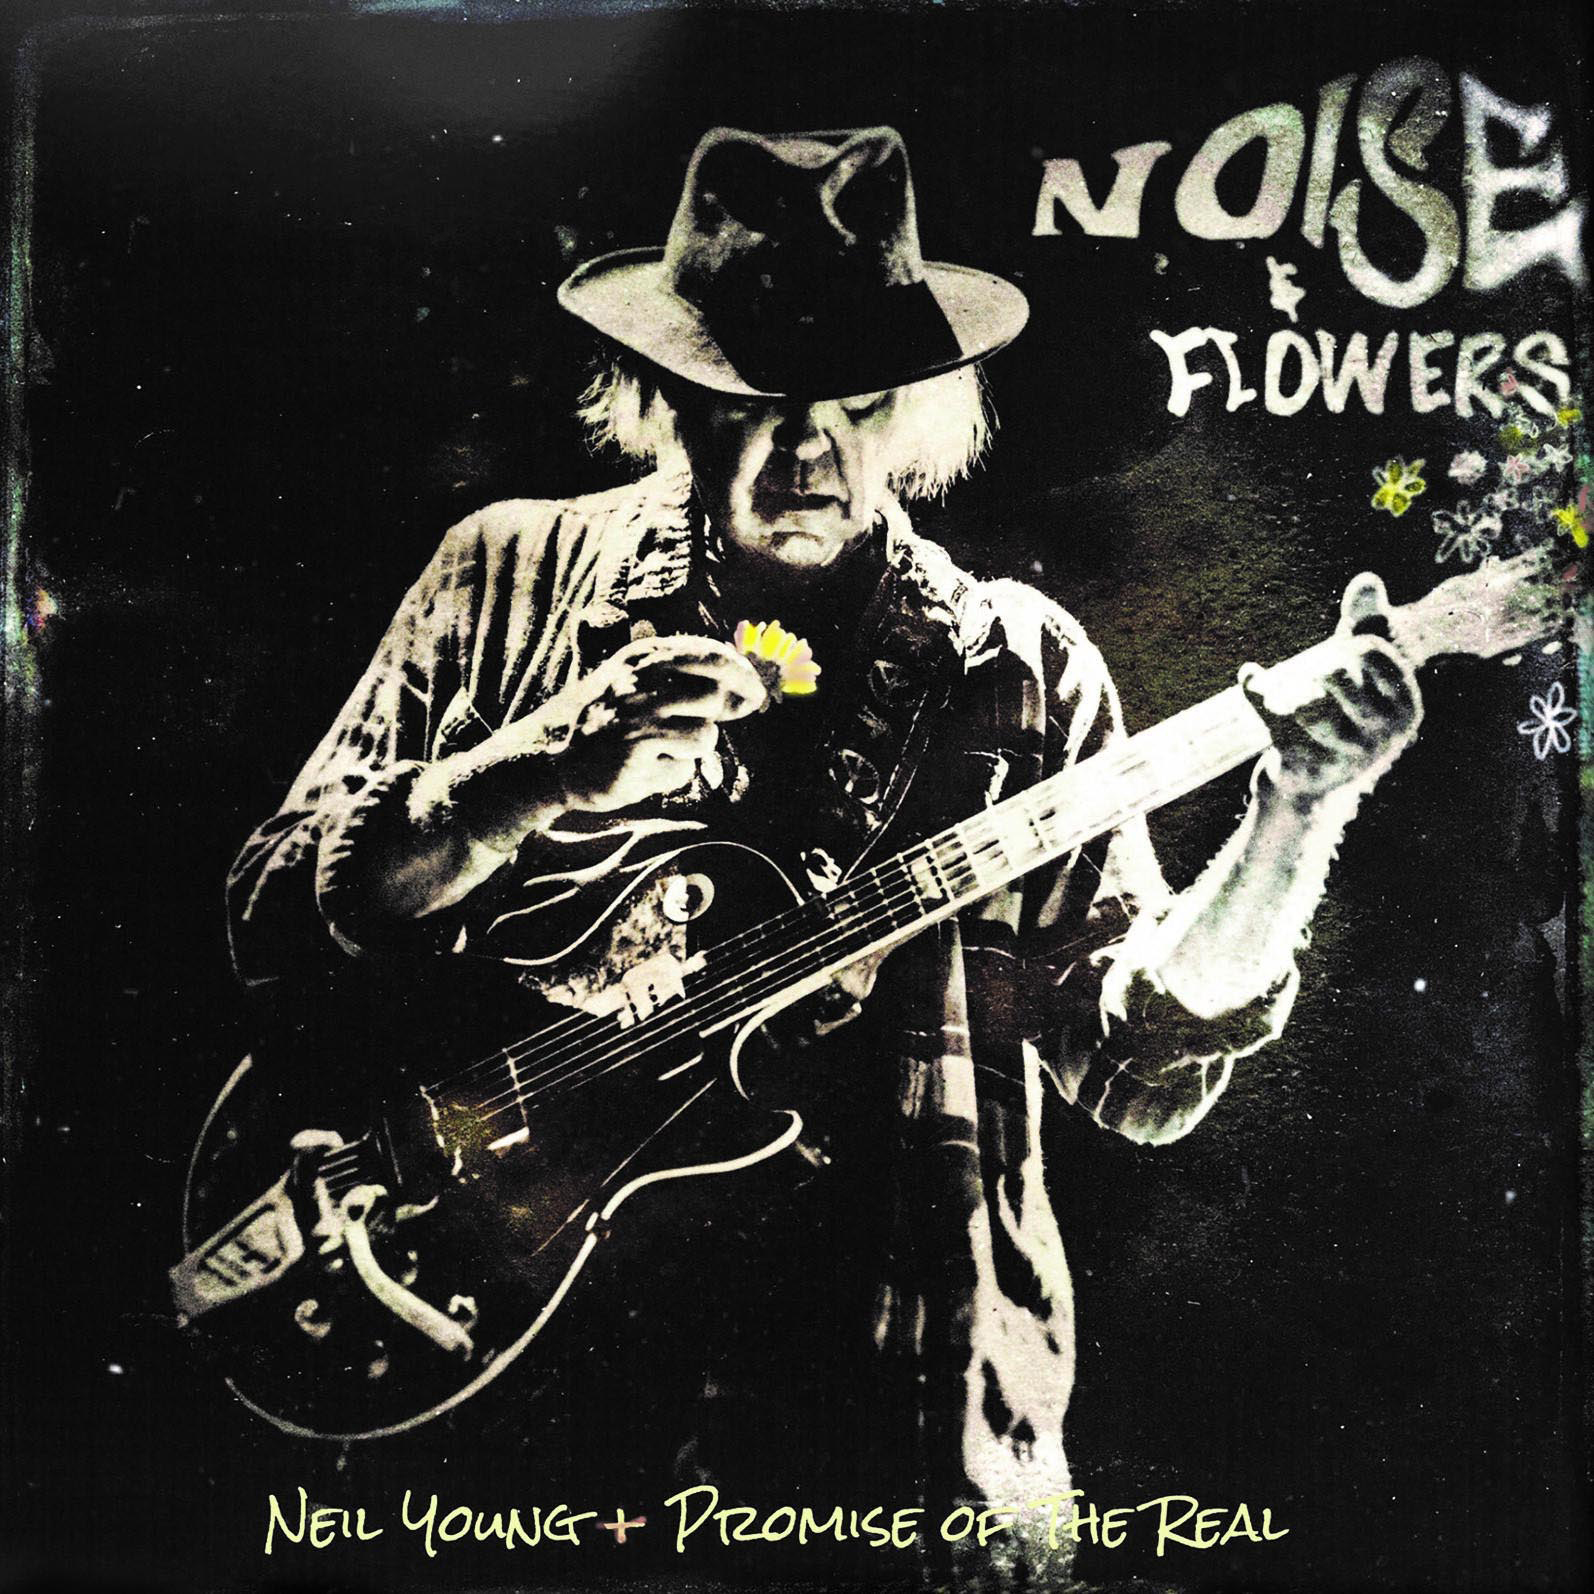 Neil Young + Promise - FLOWERS set) Of - The Real And (Box NOISE